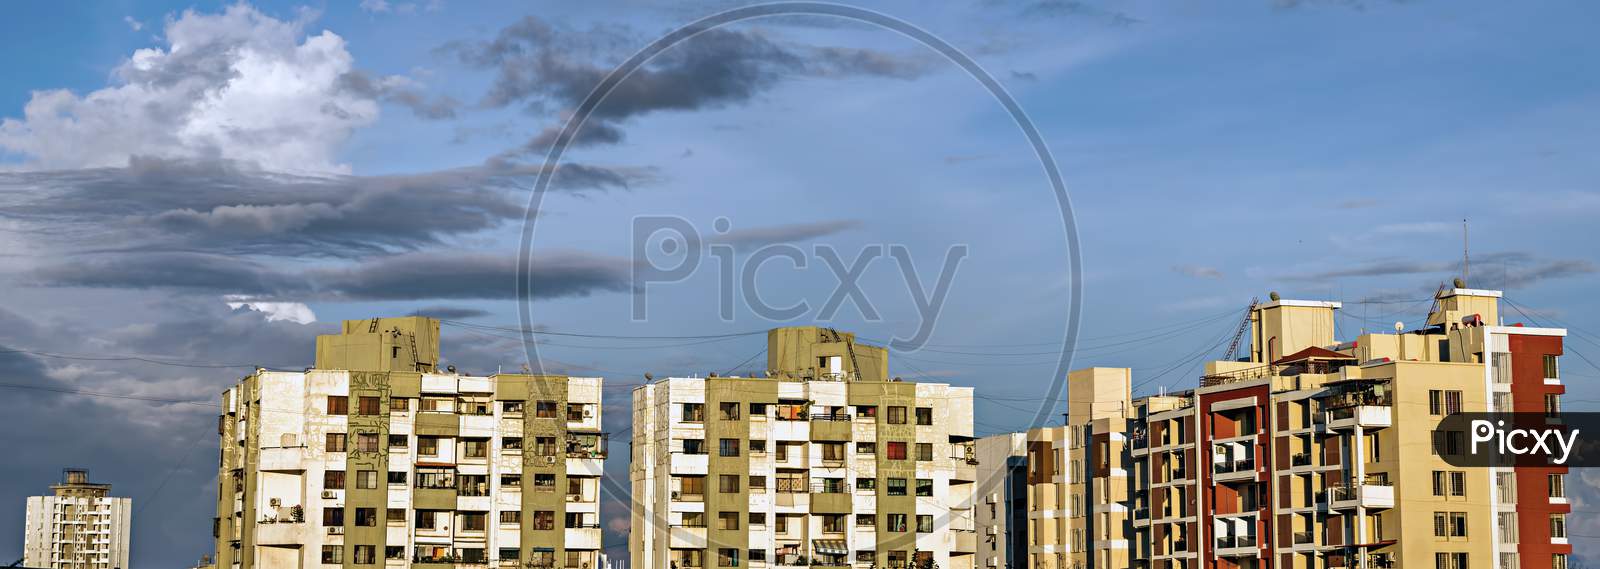 Panorama Image Of Tall Buildings In City With Beautiful Blue Monsoon Clouds.